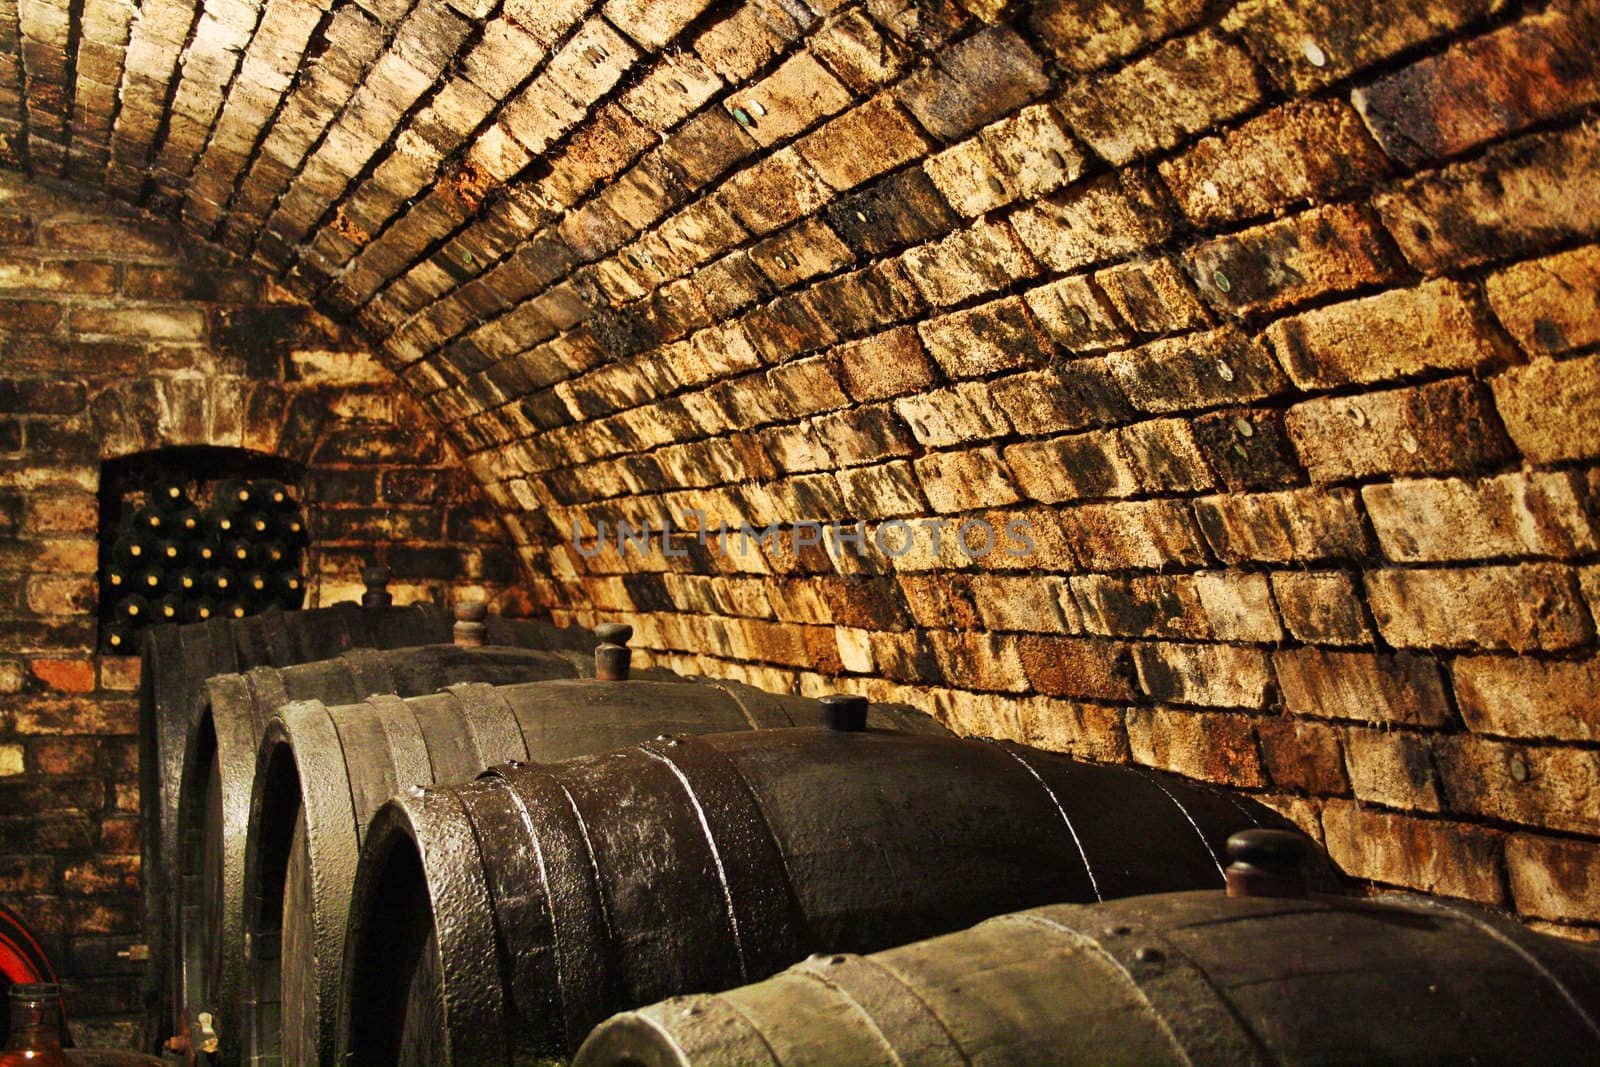 Classic Wine Cellar in Family Winery with Barrels full of Wine